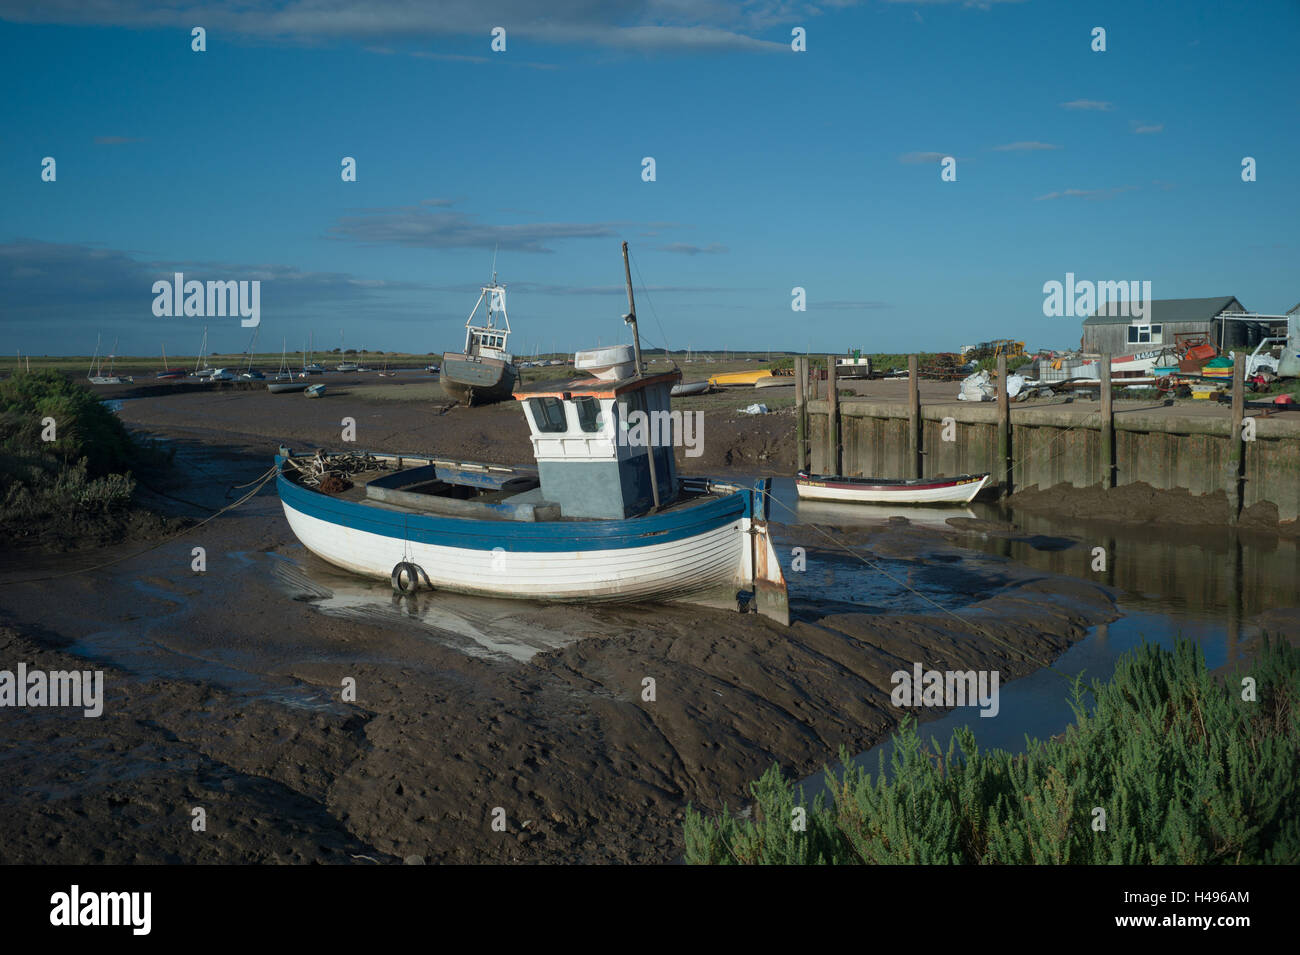 Brancaster Staithe on the North Norfolk Coast, England  boats on mudflats at Low tide. Stock Photo